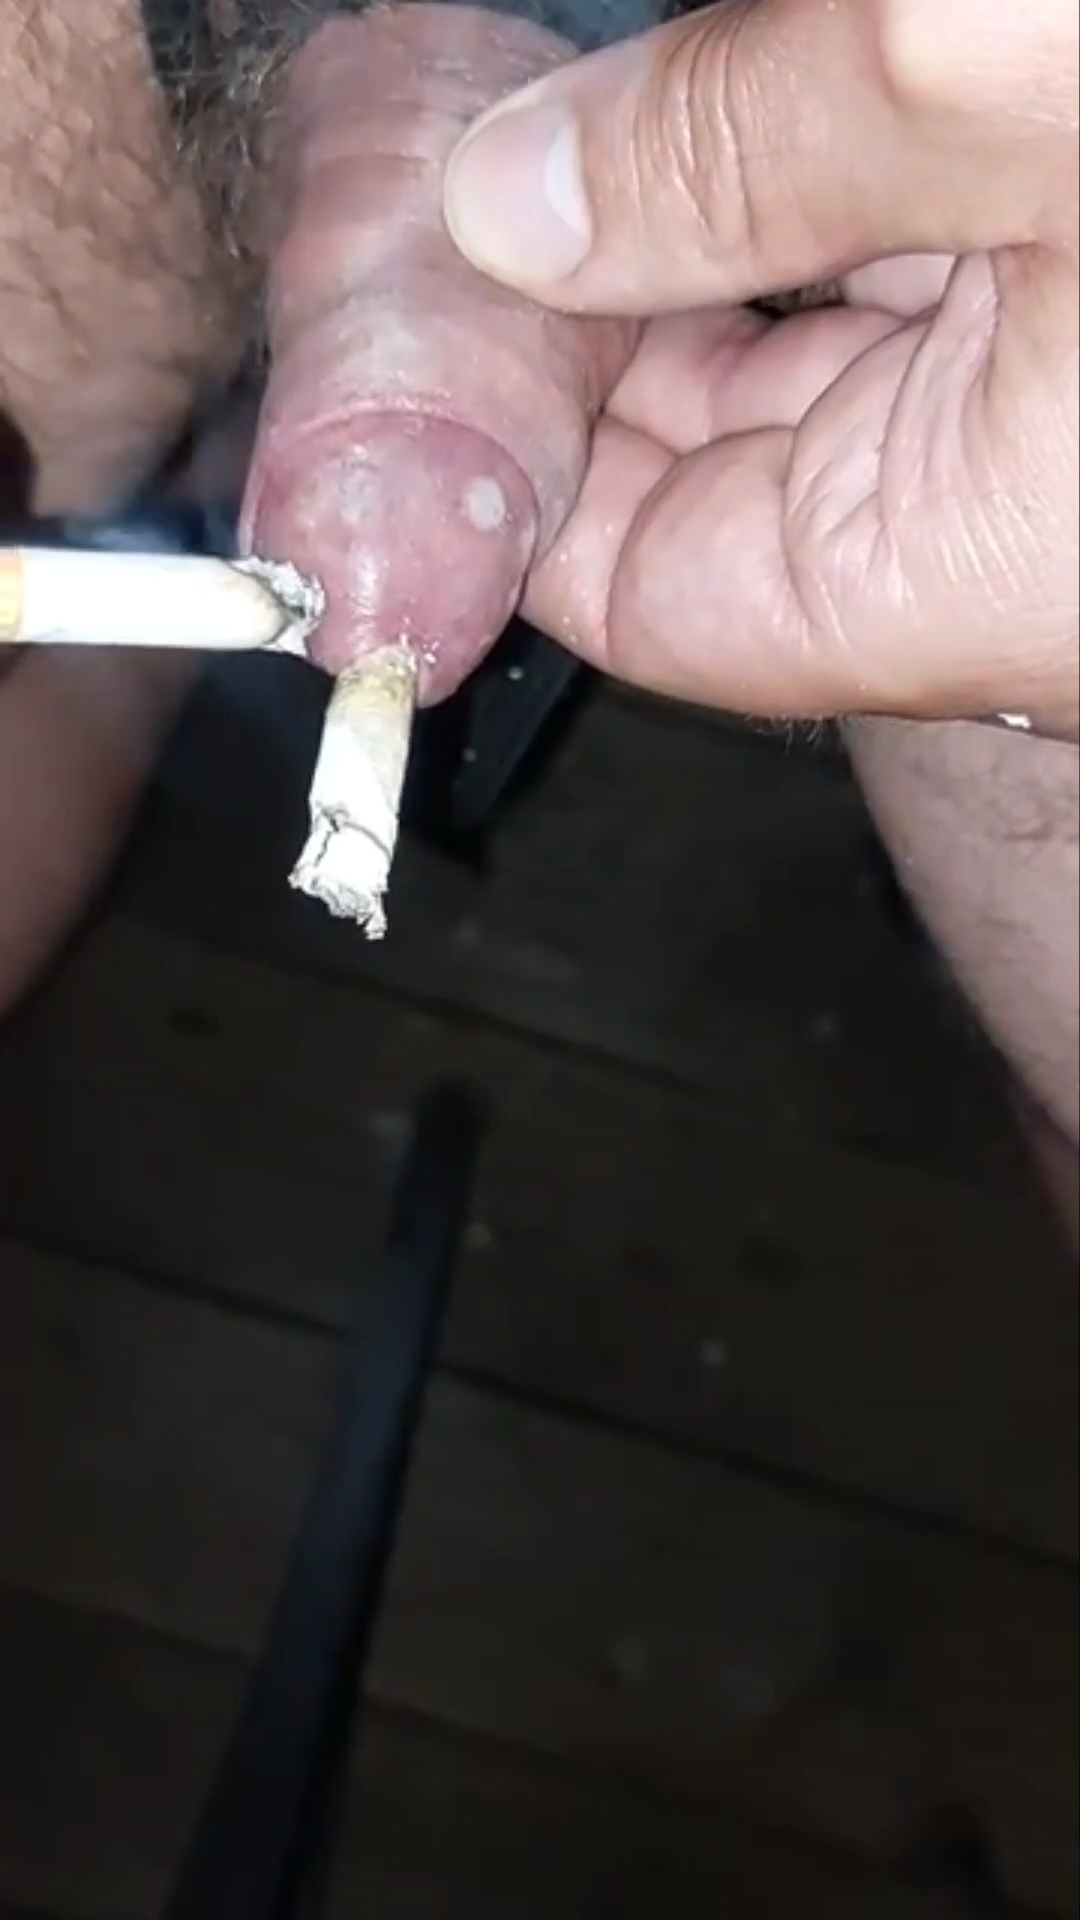 Cigarette burn of piss hole and cockhead, part 1